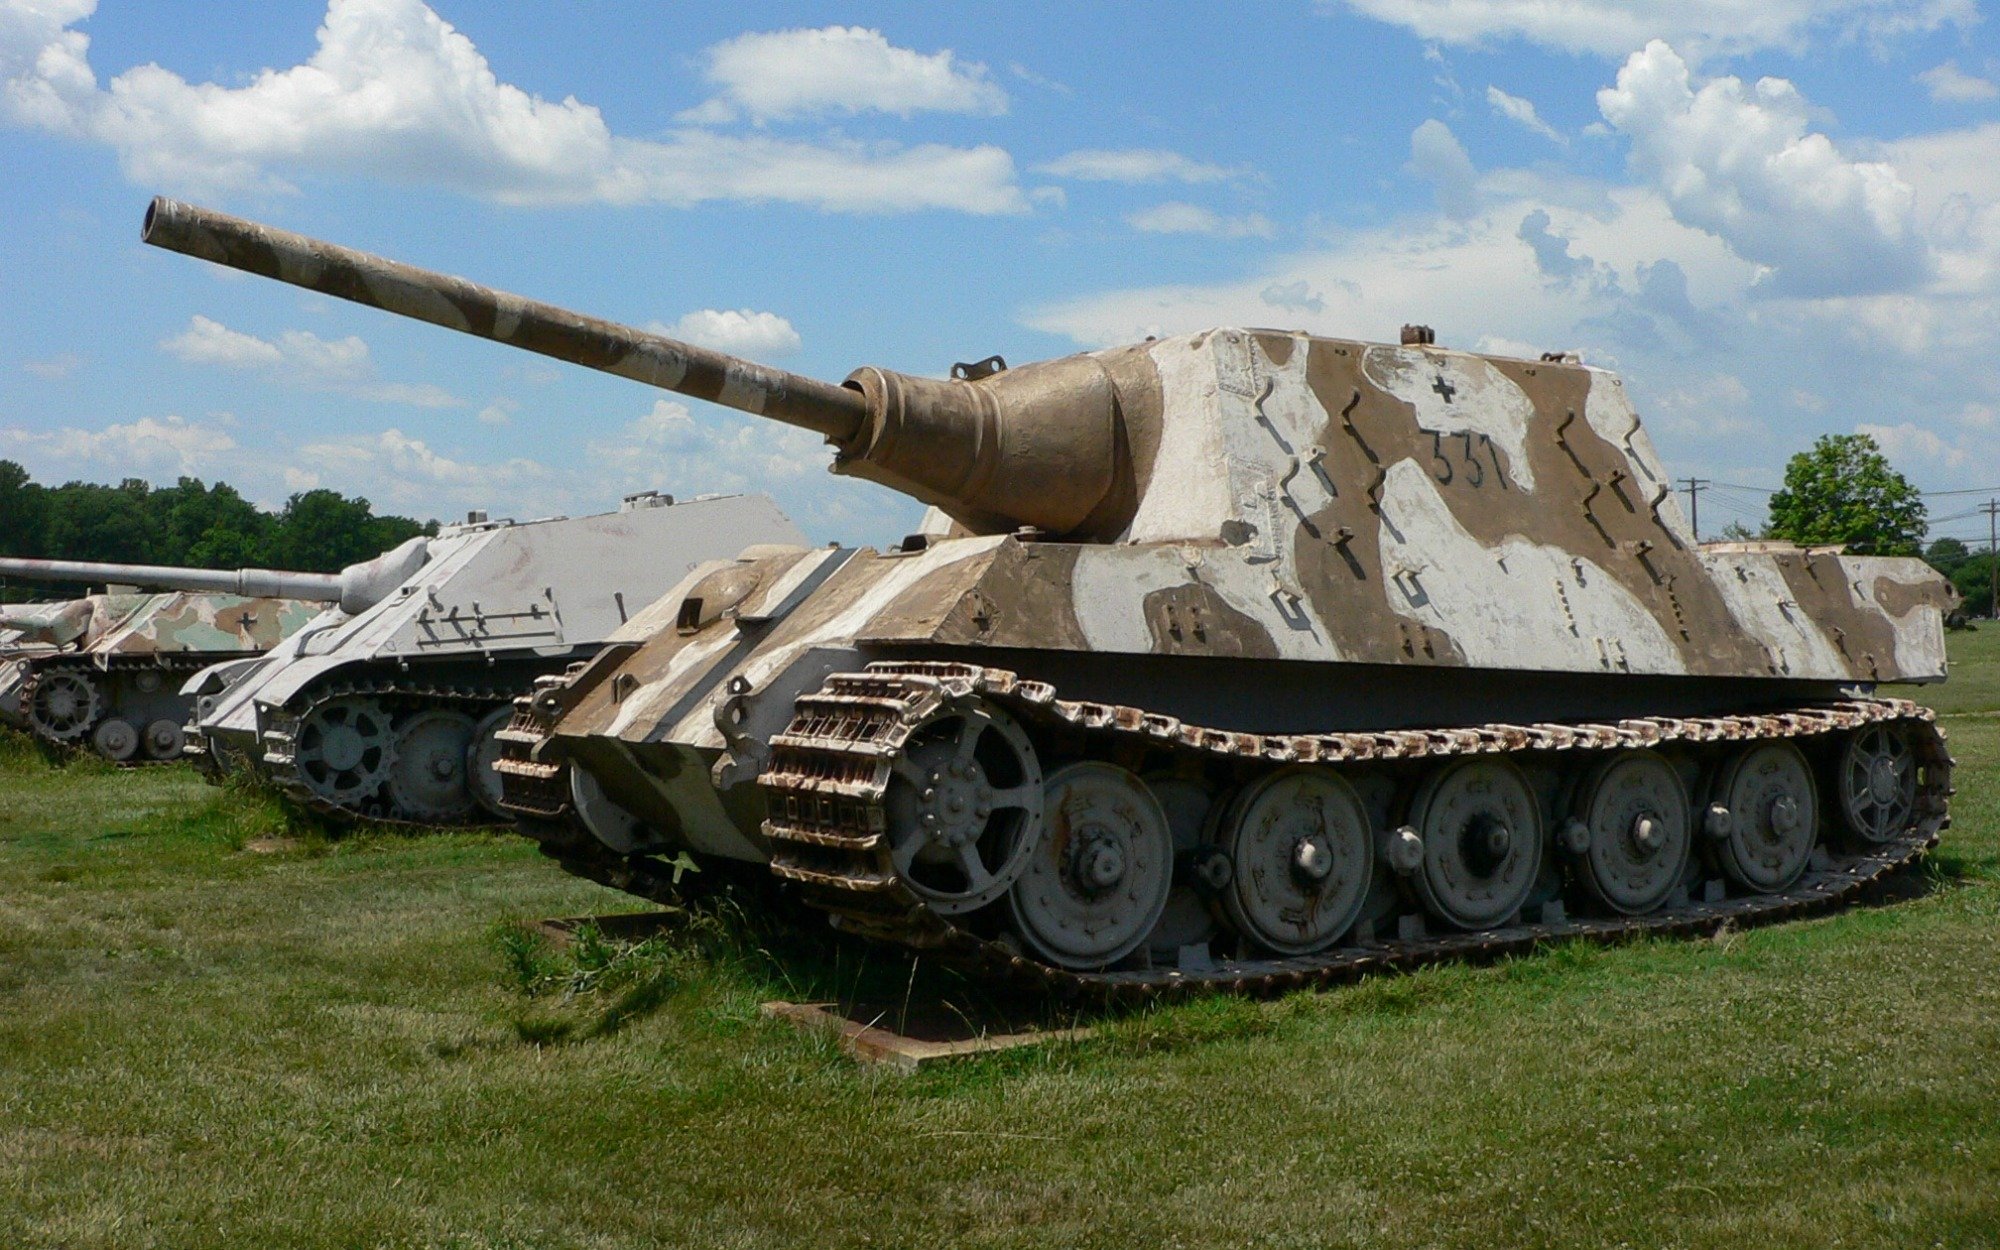 Hitlers Fearsome Jagdtiger Tank Destroyer Had Some Serious Problems